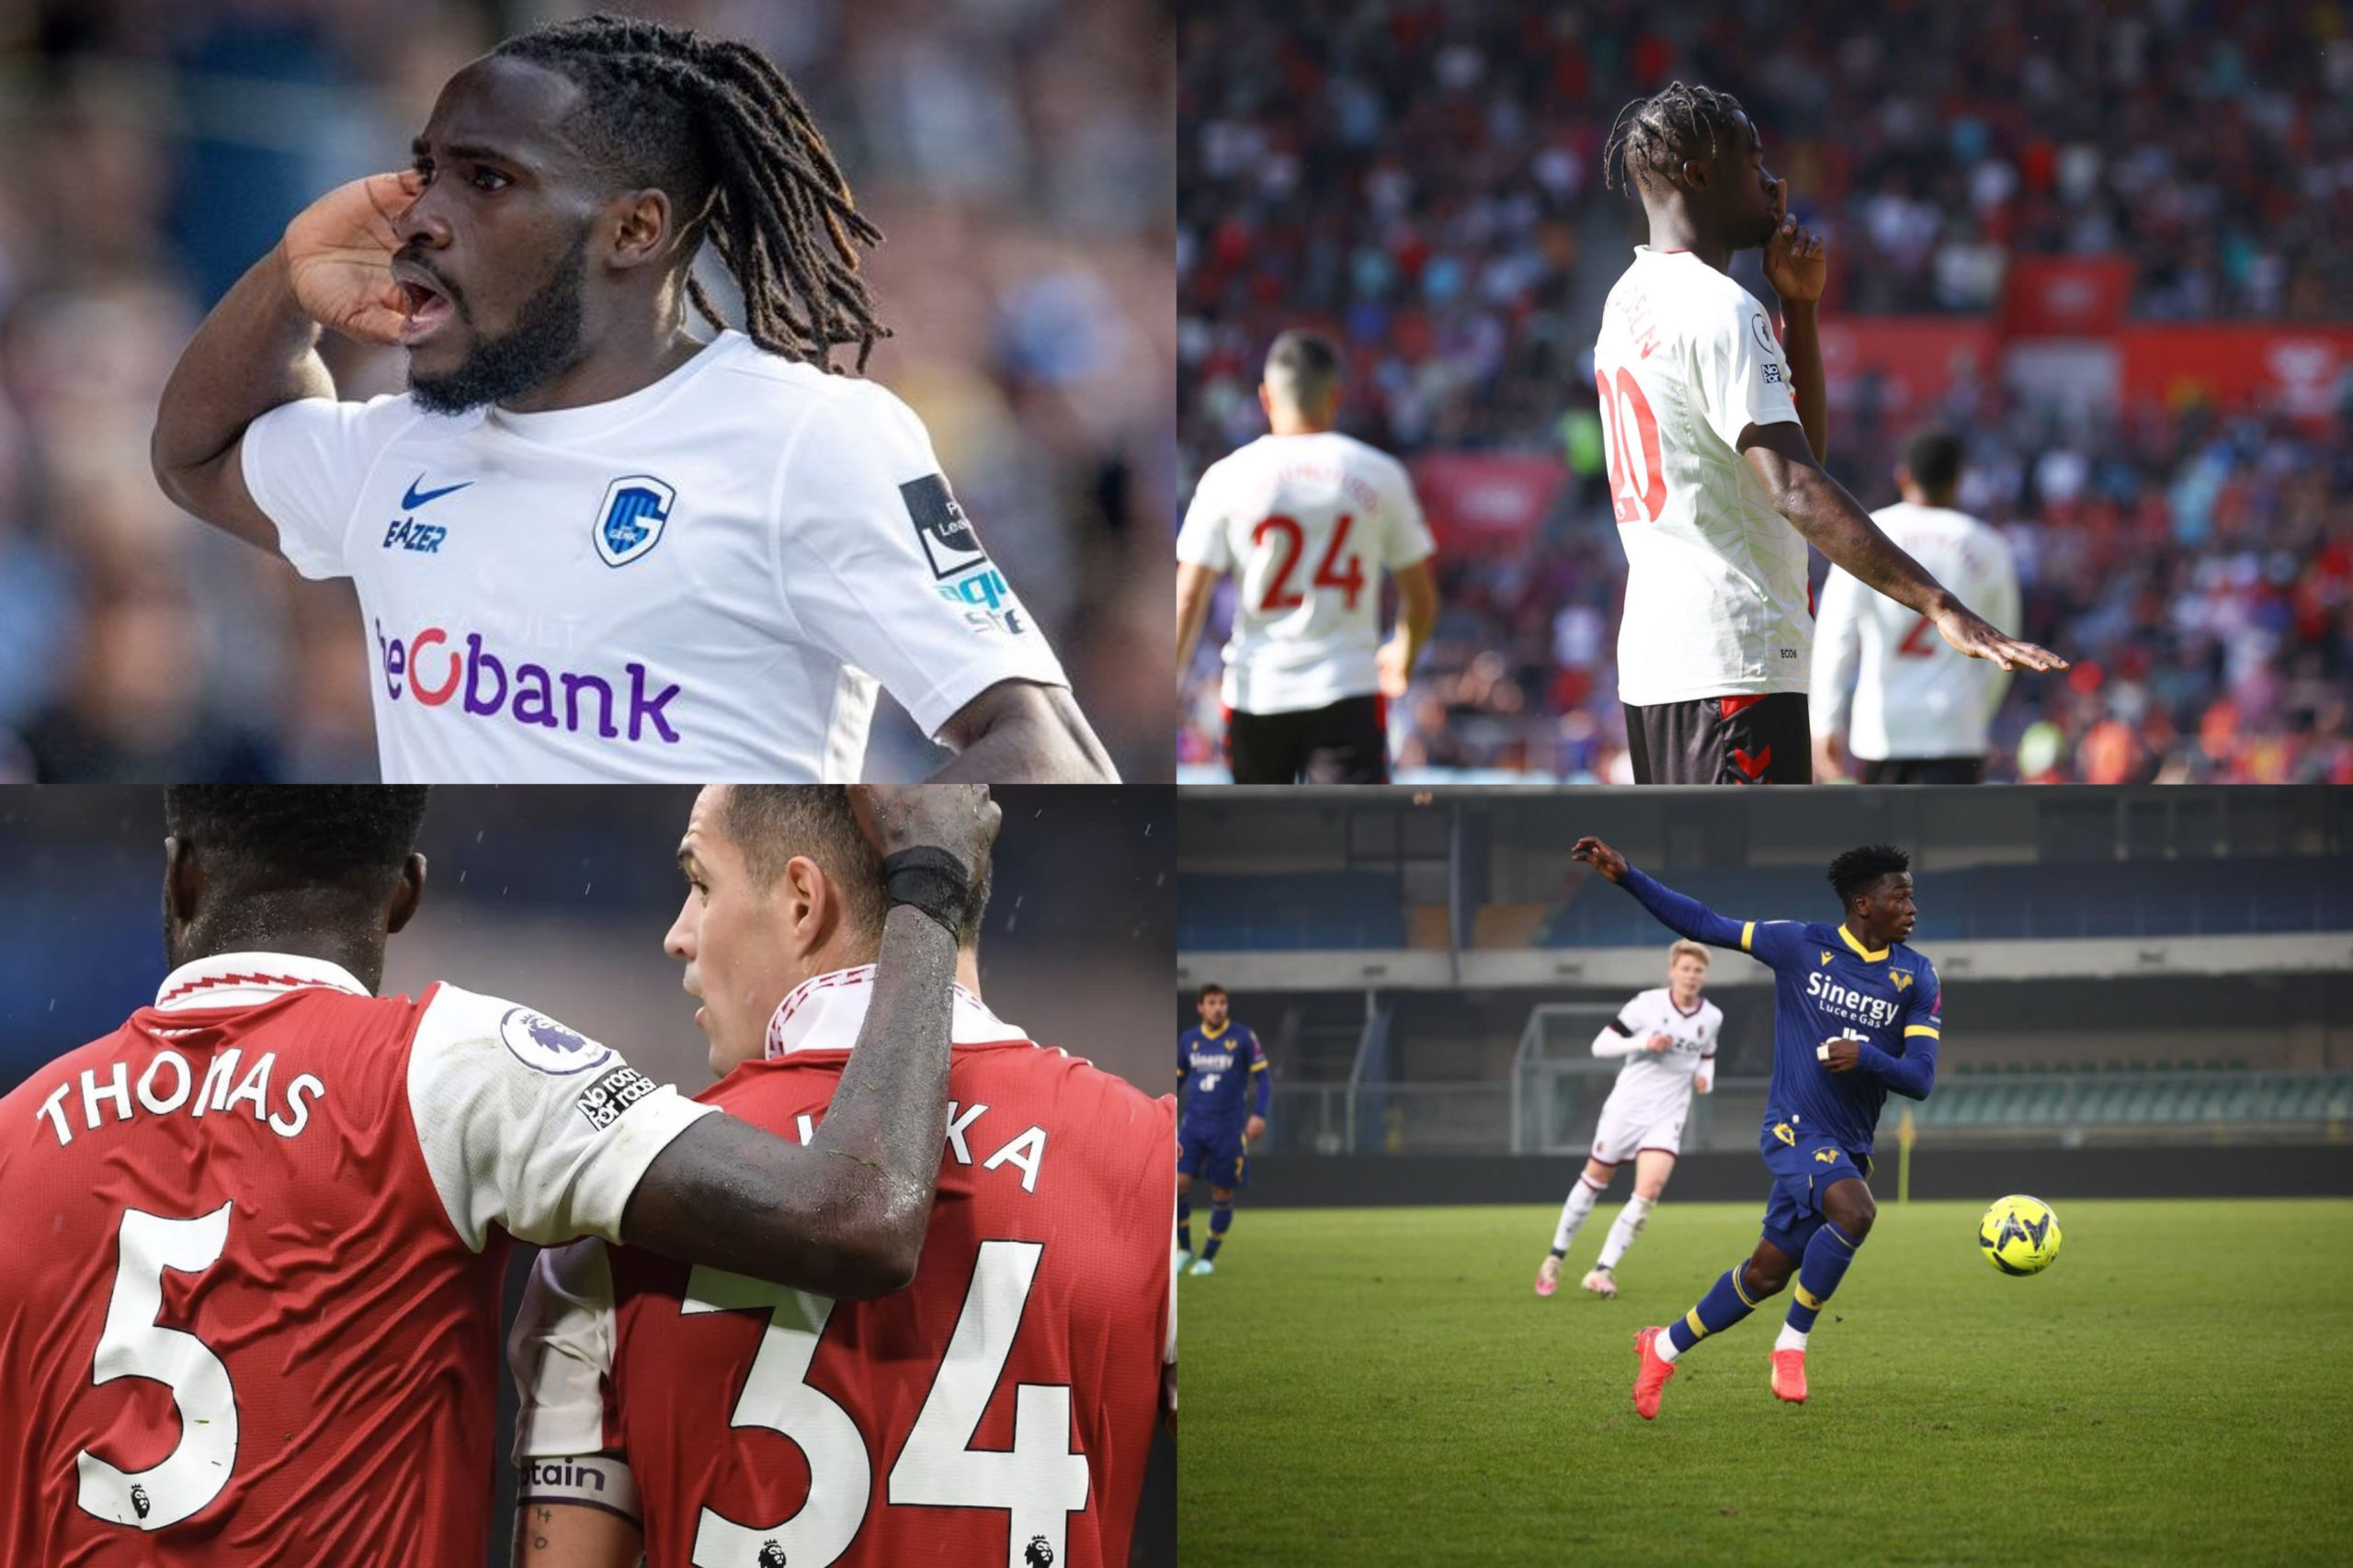 Ghanaian players abroad wrap: Kamaldeen Sulemana fires double vs Liverpool, Joseph Paintsil hits brace for Genk at Club Brugge